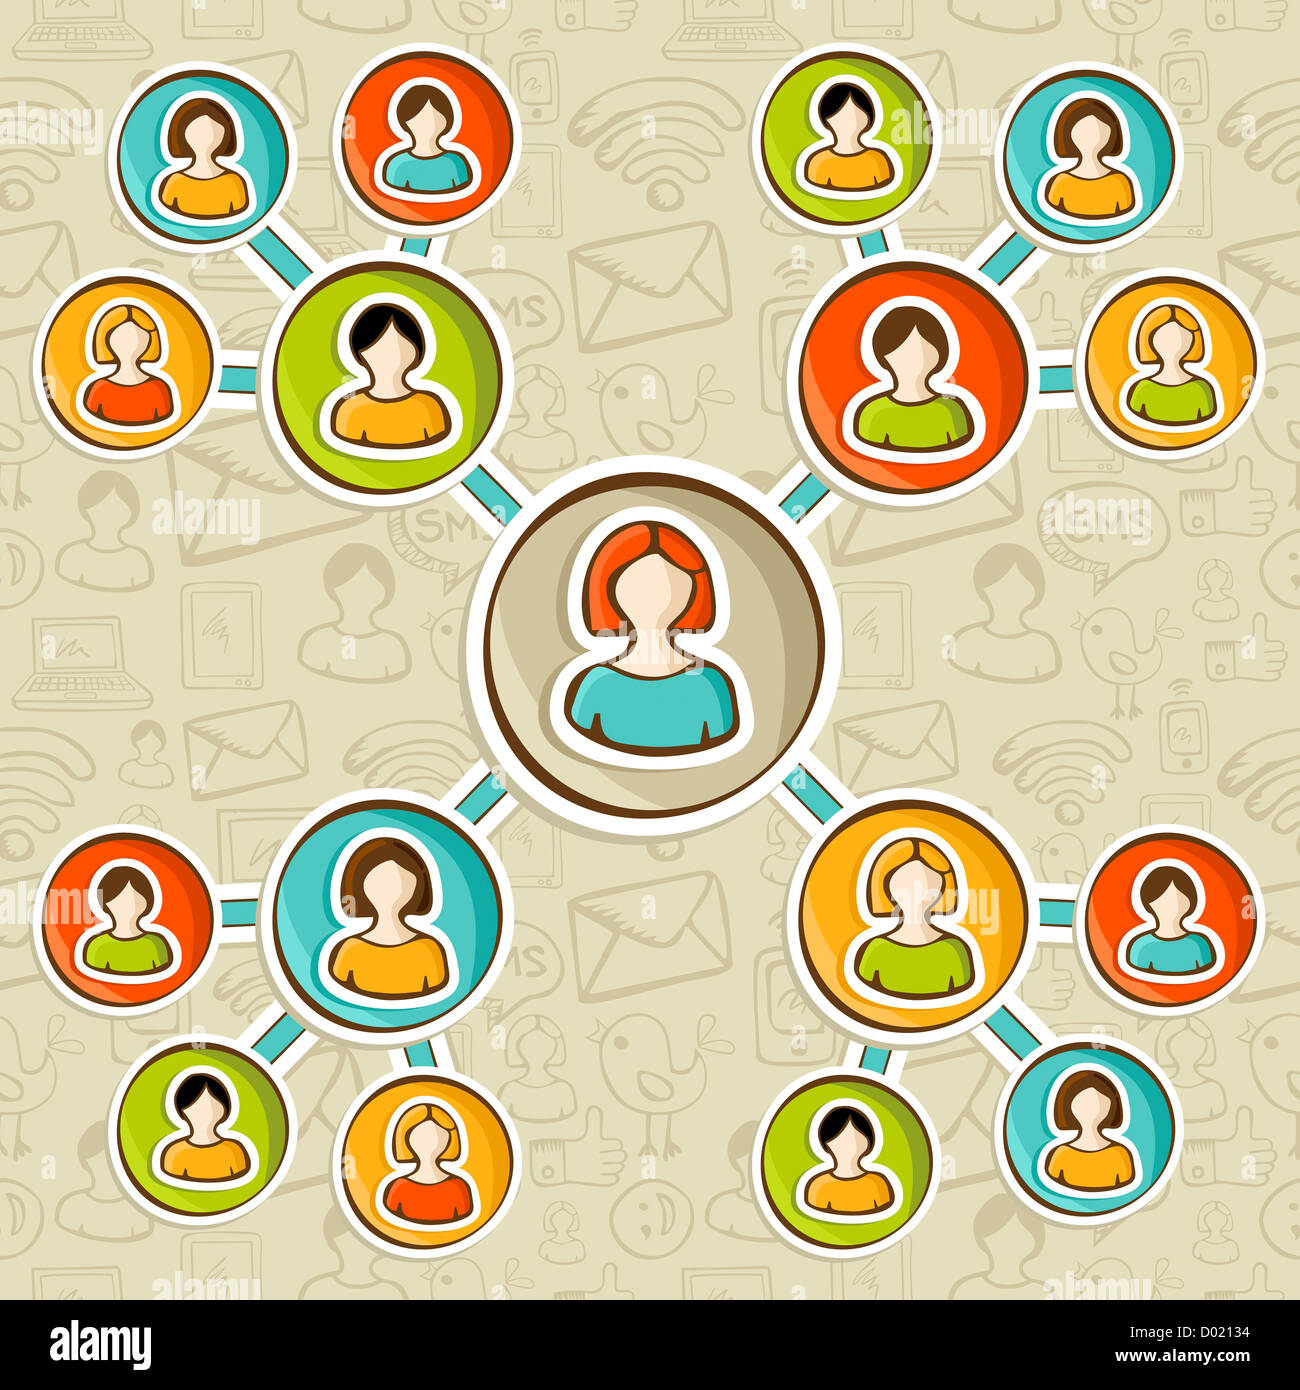 Social media networks online marketing relationship diagram over sketch icons pattern. User people connected to each other. Vector illustration layered for easy manipulation and custom coloring. Stock Photo